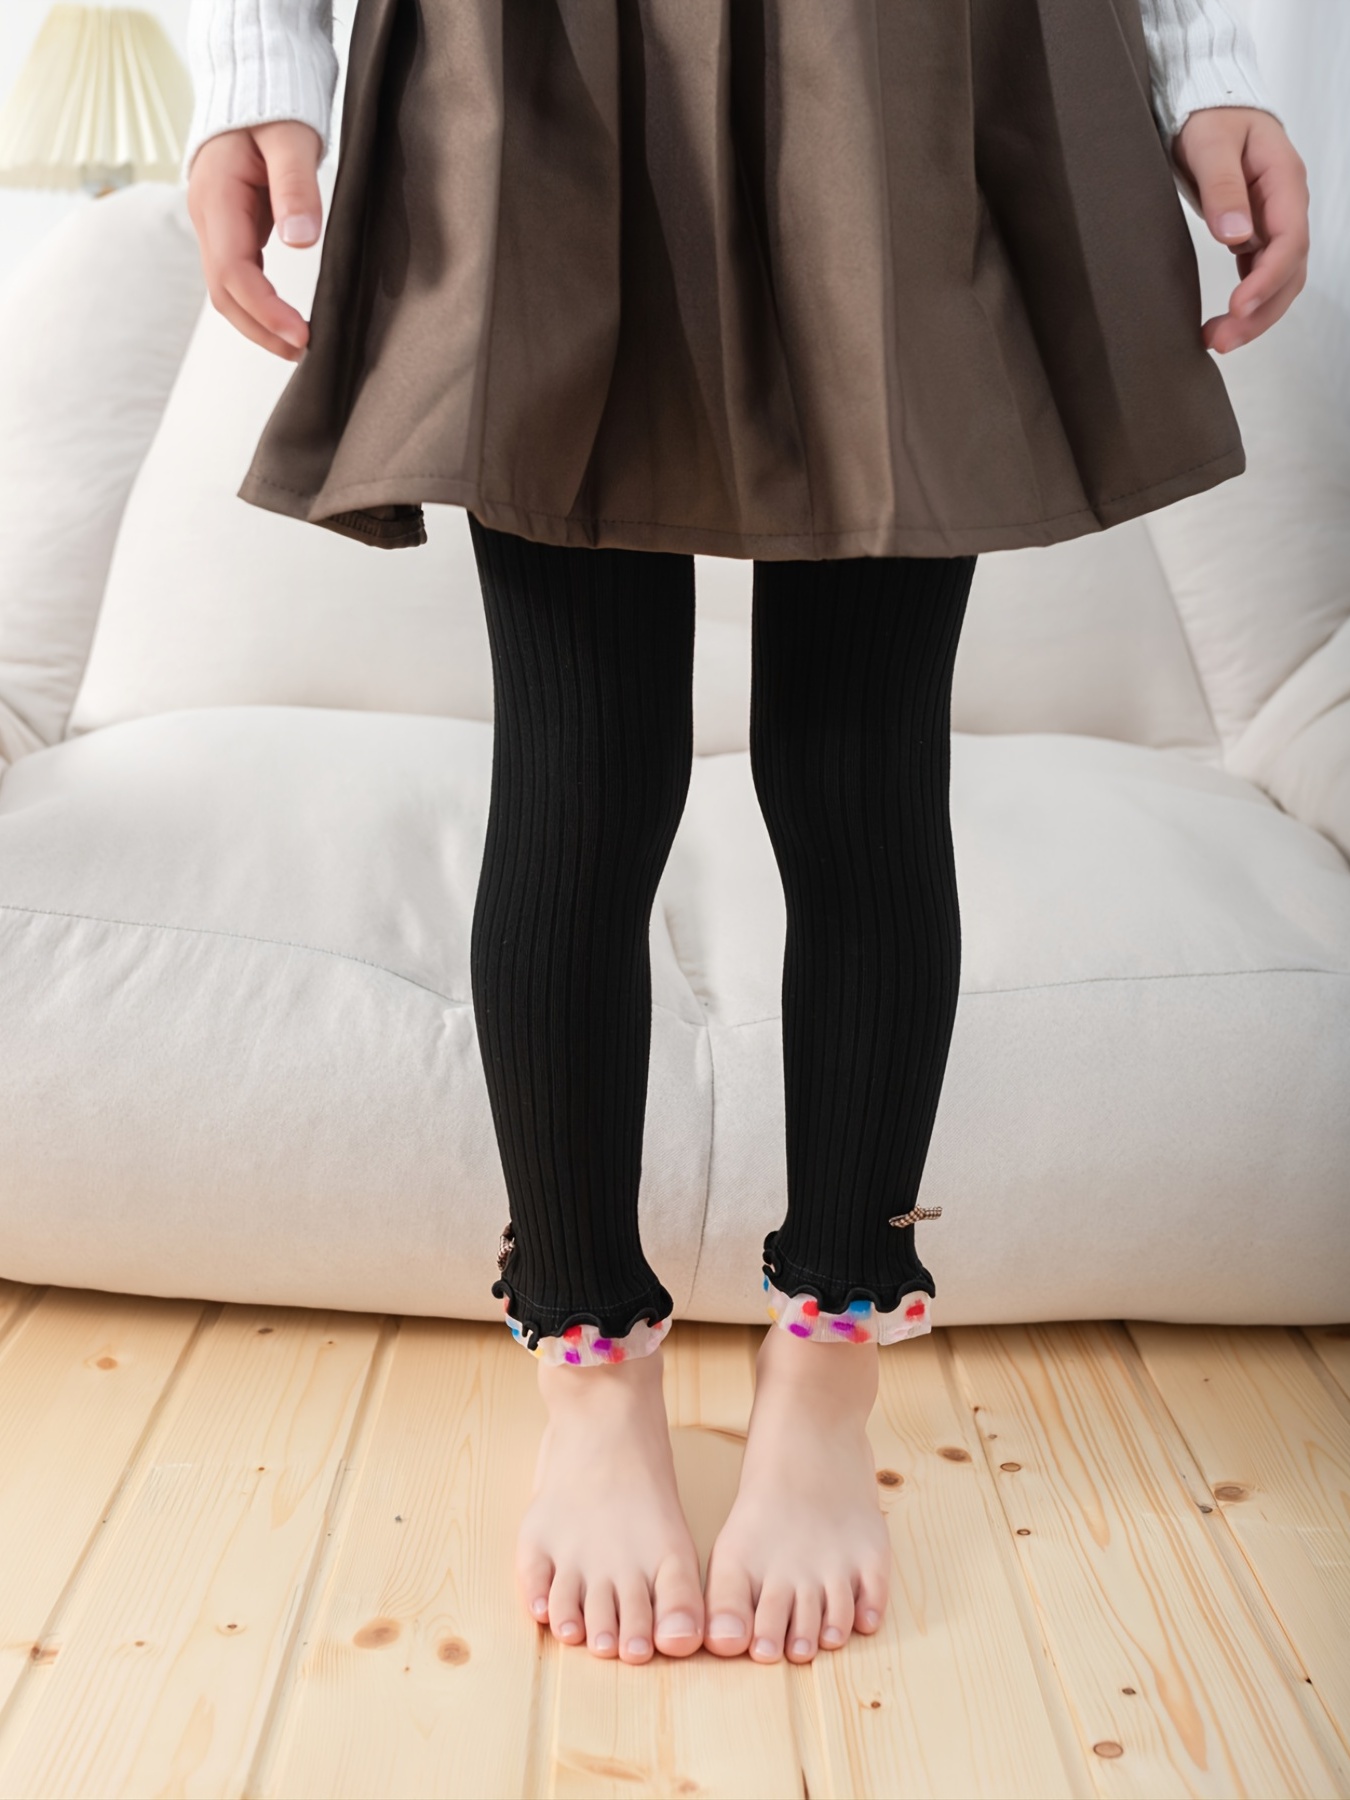 Girls' Footless Tights with lace trim